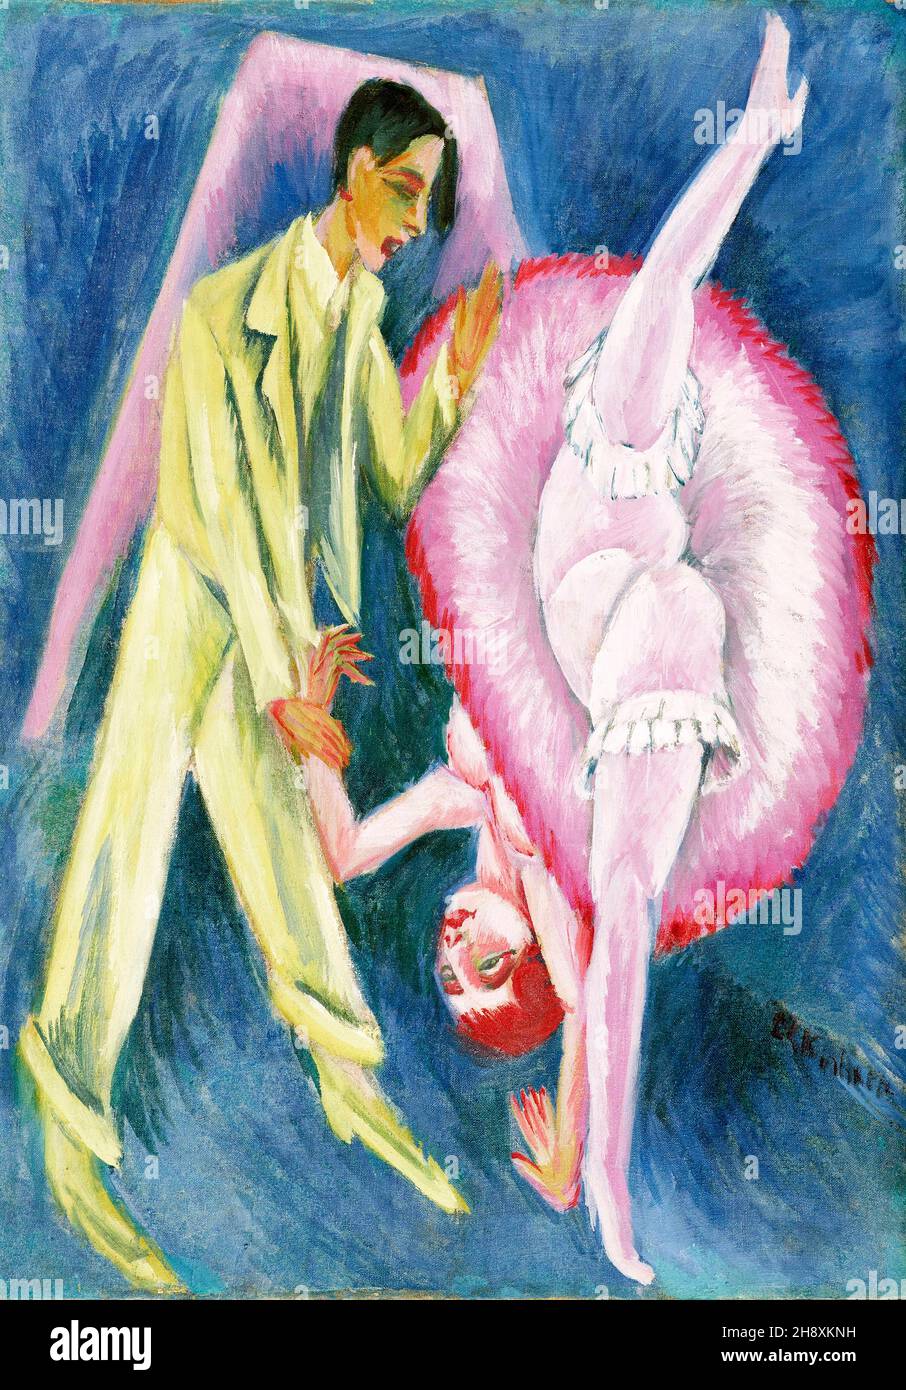 Dancing Couple by Ernst Ludwig Kirchner (1880-1938), oil on canvas, 1914 Stock Photo